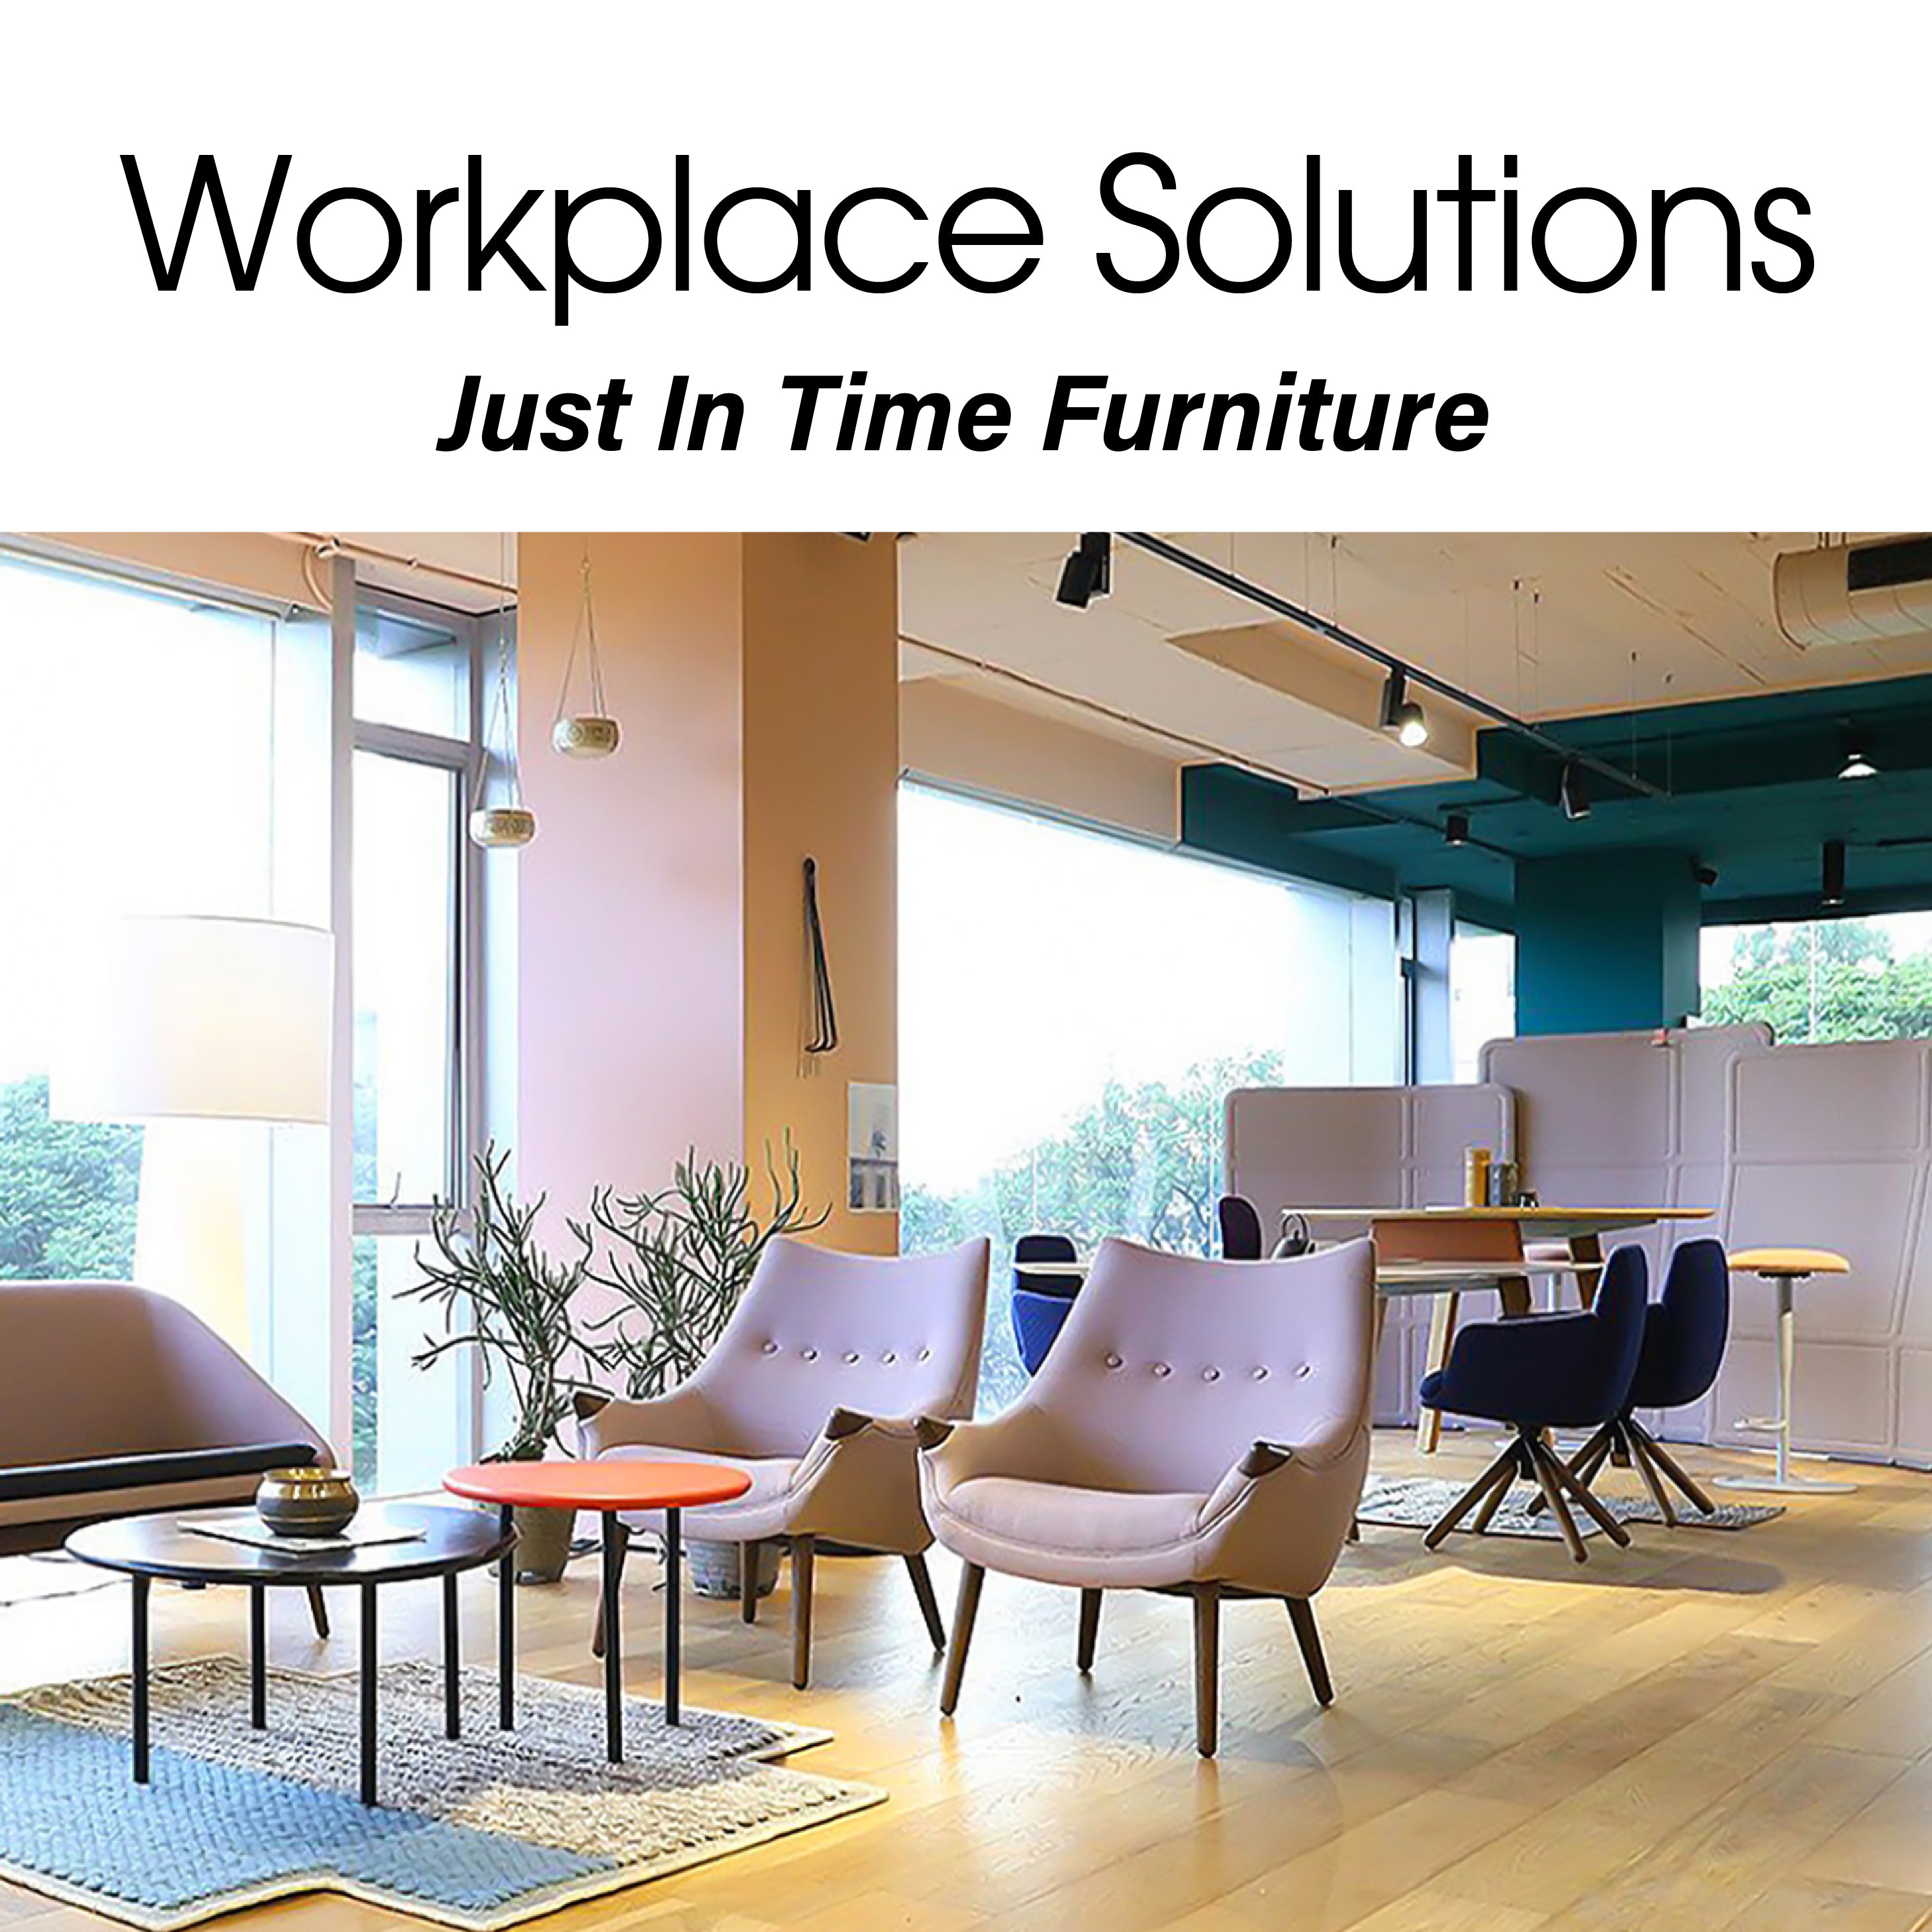 Workplace Solutions | Just In Time Furniture